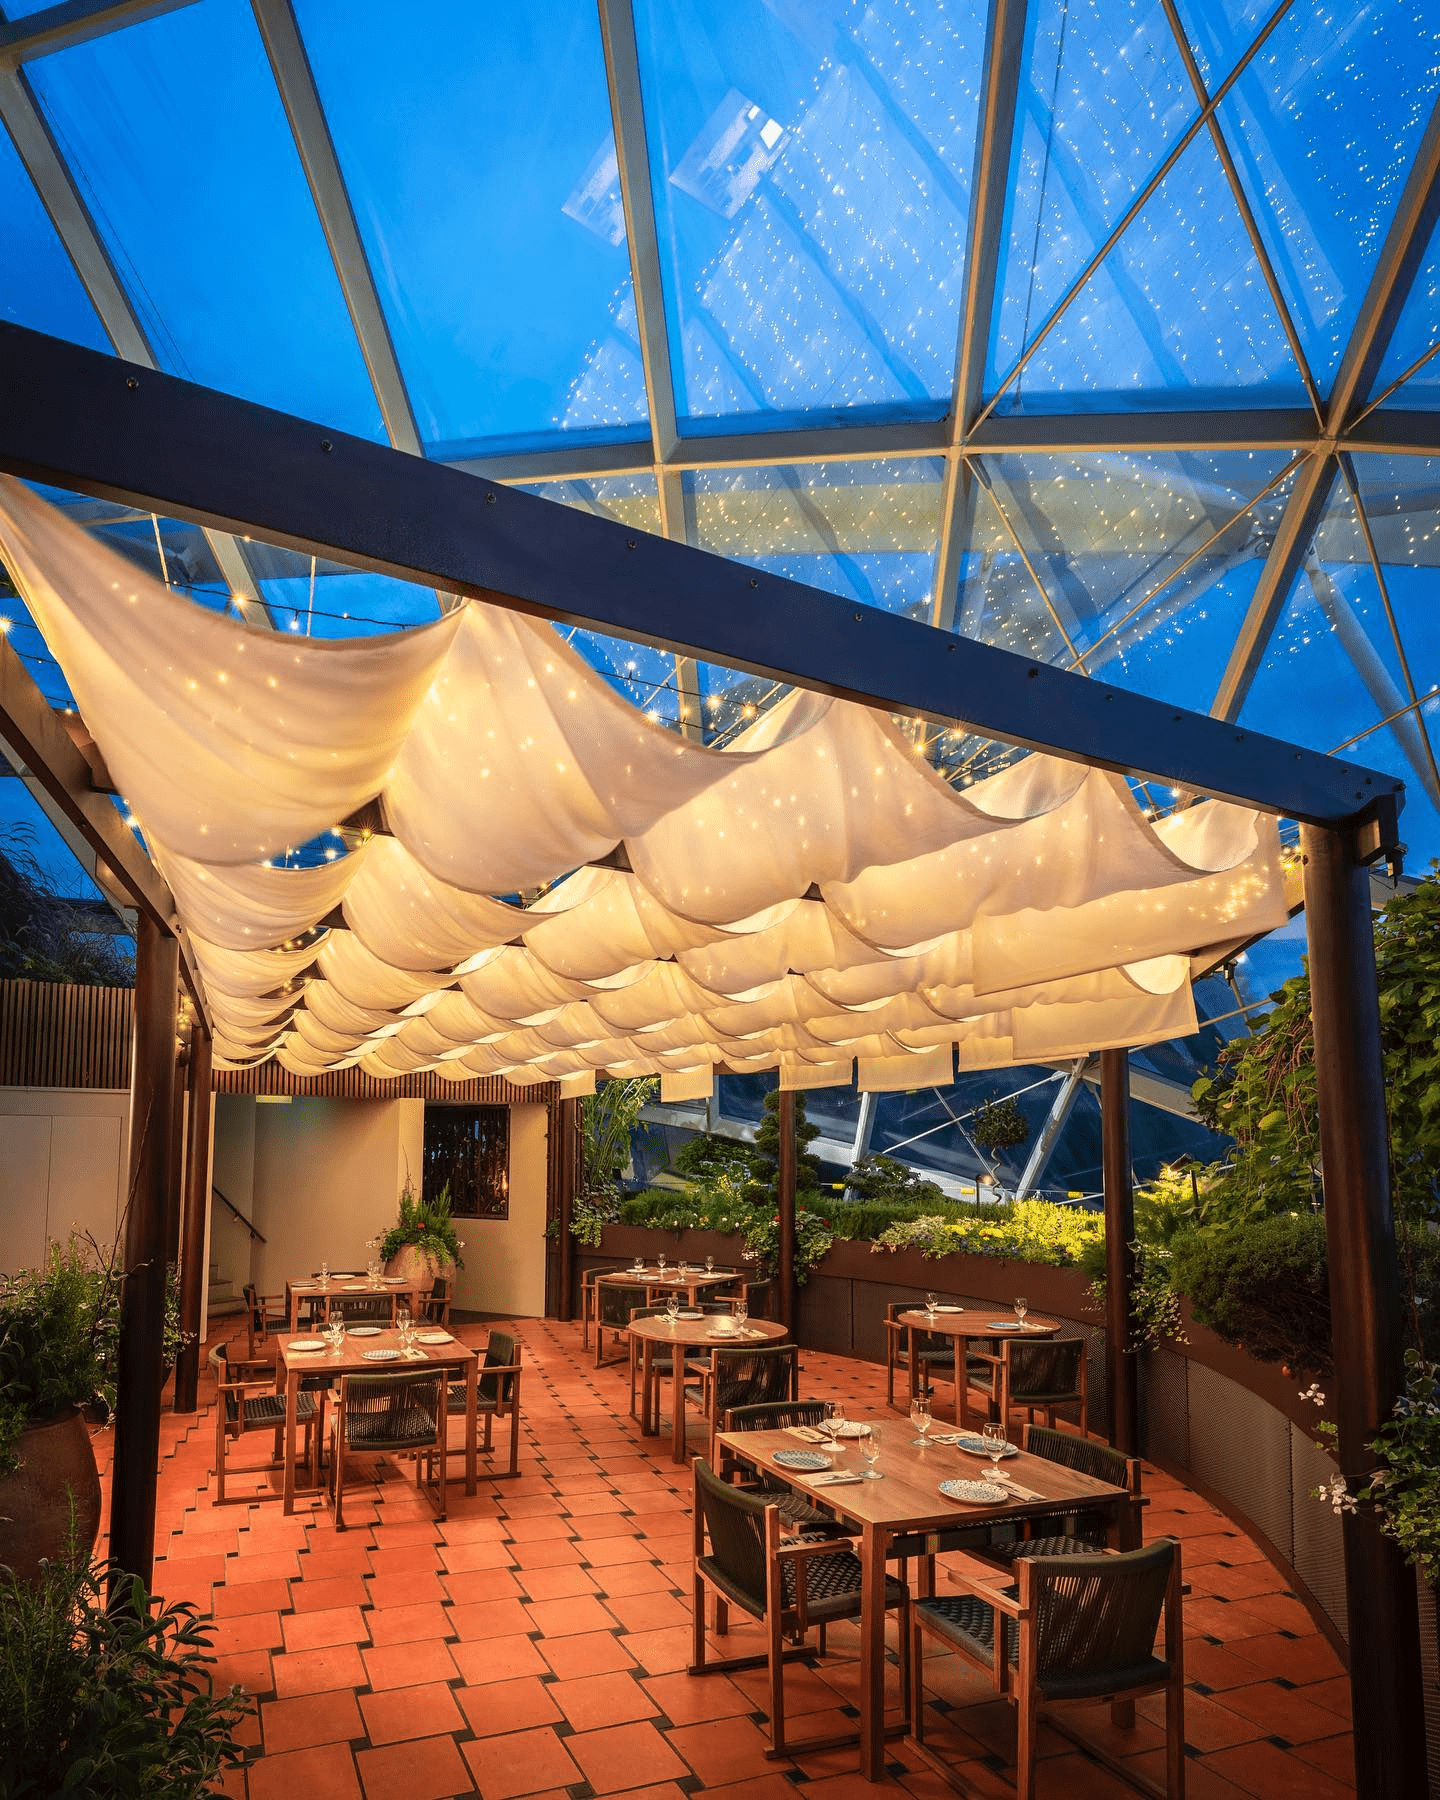 Glass house cafes - Hortus at night